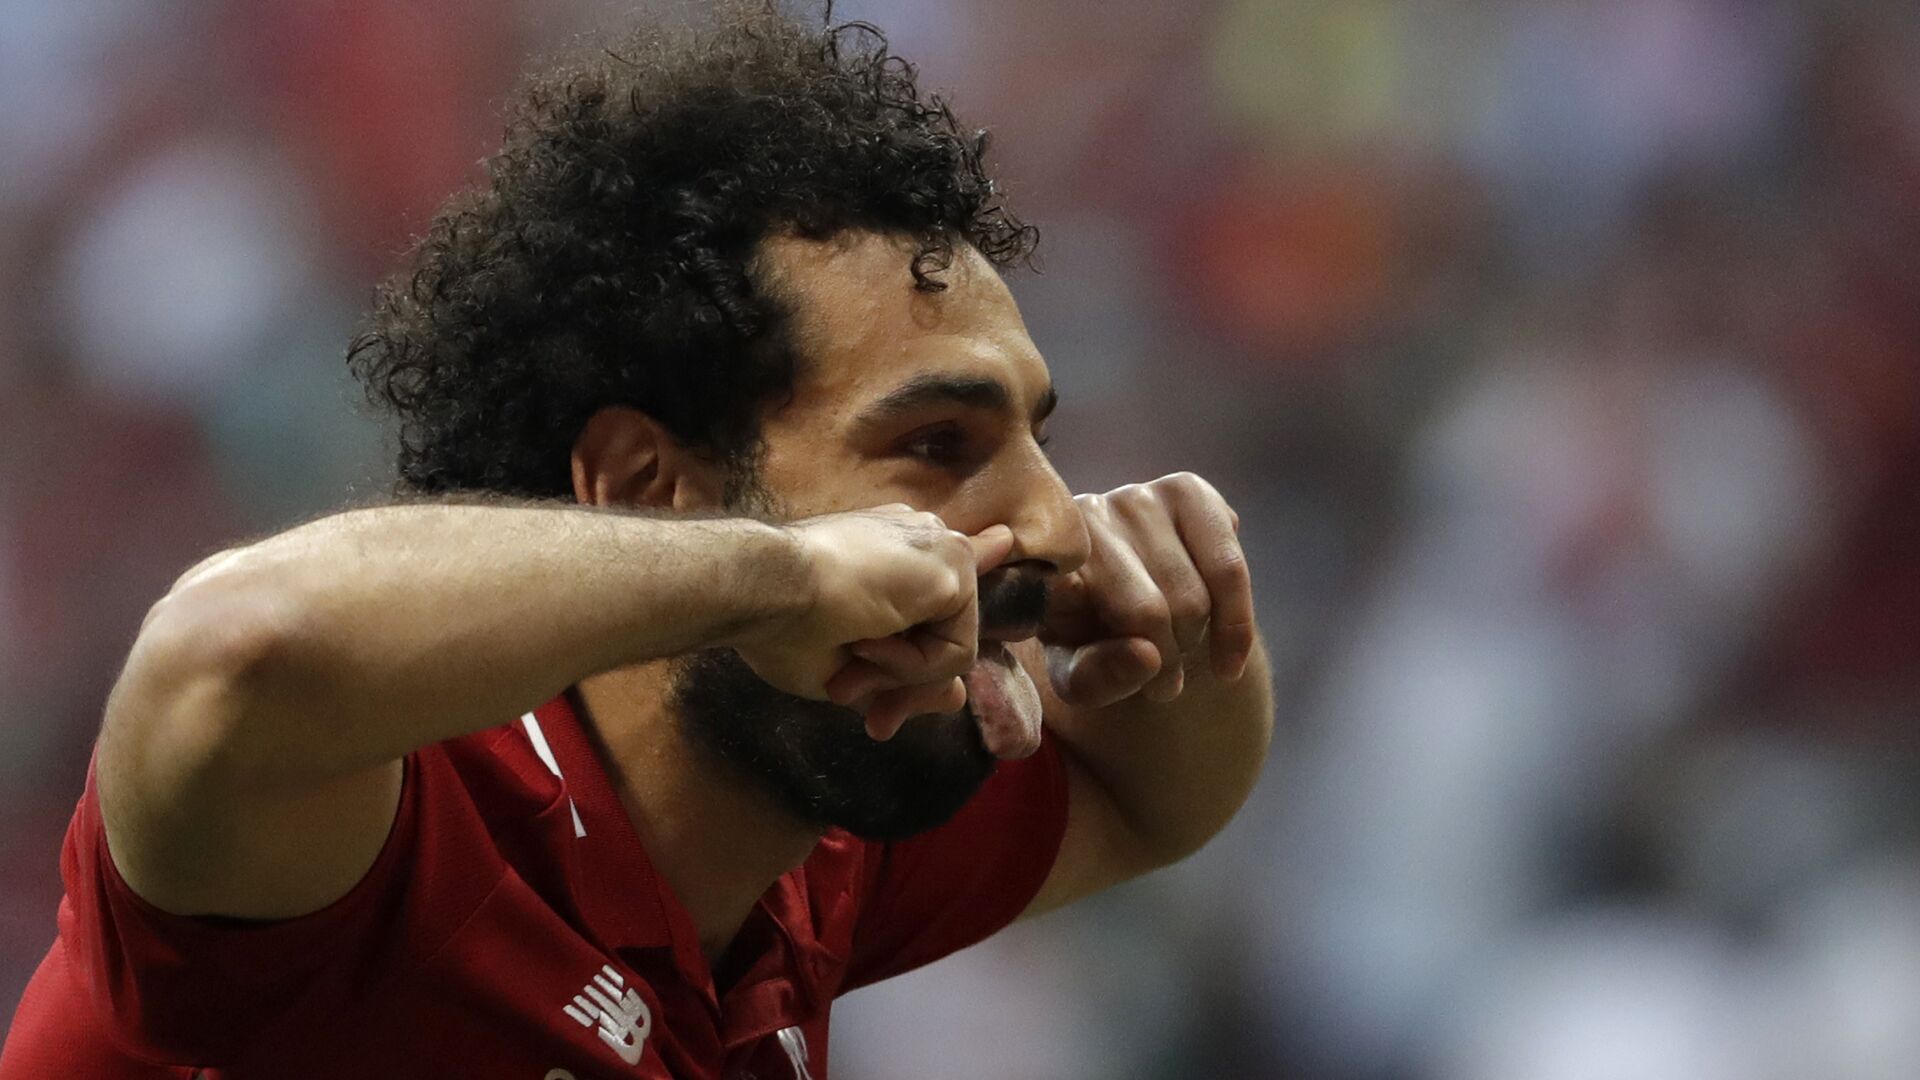 Liverpool's Mohamed Salah celebrates after scoring his side's opening goal during the Champions League final soccer match between Tottenham Hotspur and Liverpool at the Wanda Metropolitano Stadium in Madrid, Saturday, June 1, 2019. - Sputnik International, 1920, 28.03.2022